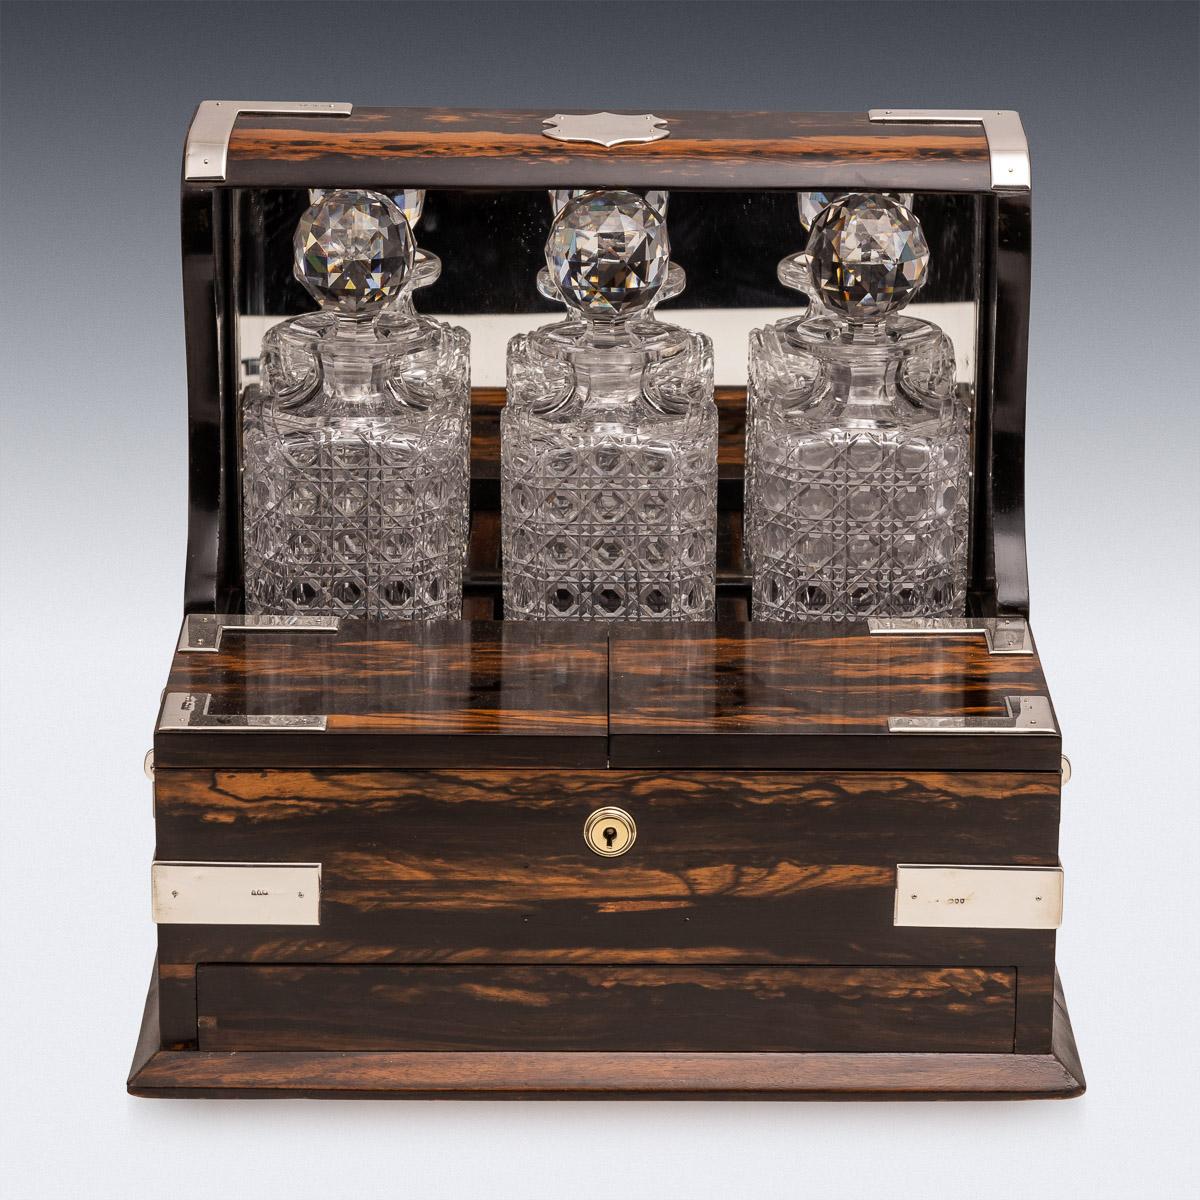 Antique late 19th century Victorian solid silver mounted on Coromandel Tantilus, humidor and games compendium, the interior comprising three cut crystal decanters with stoppers, four glasses, a secret hidden draw, which opens by first opening the